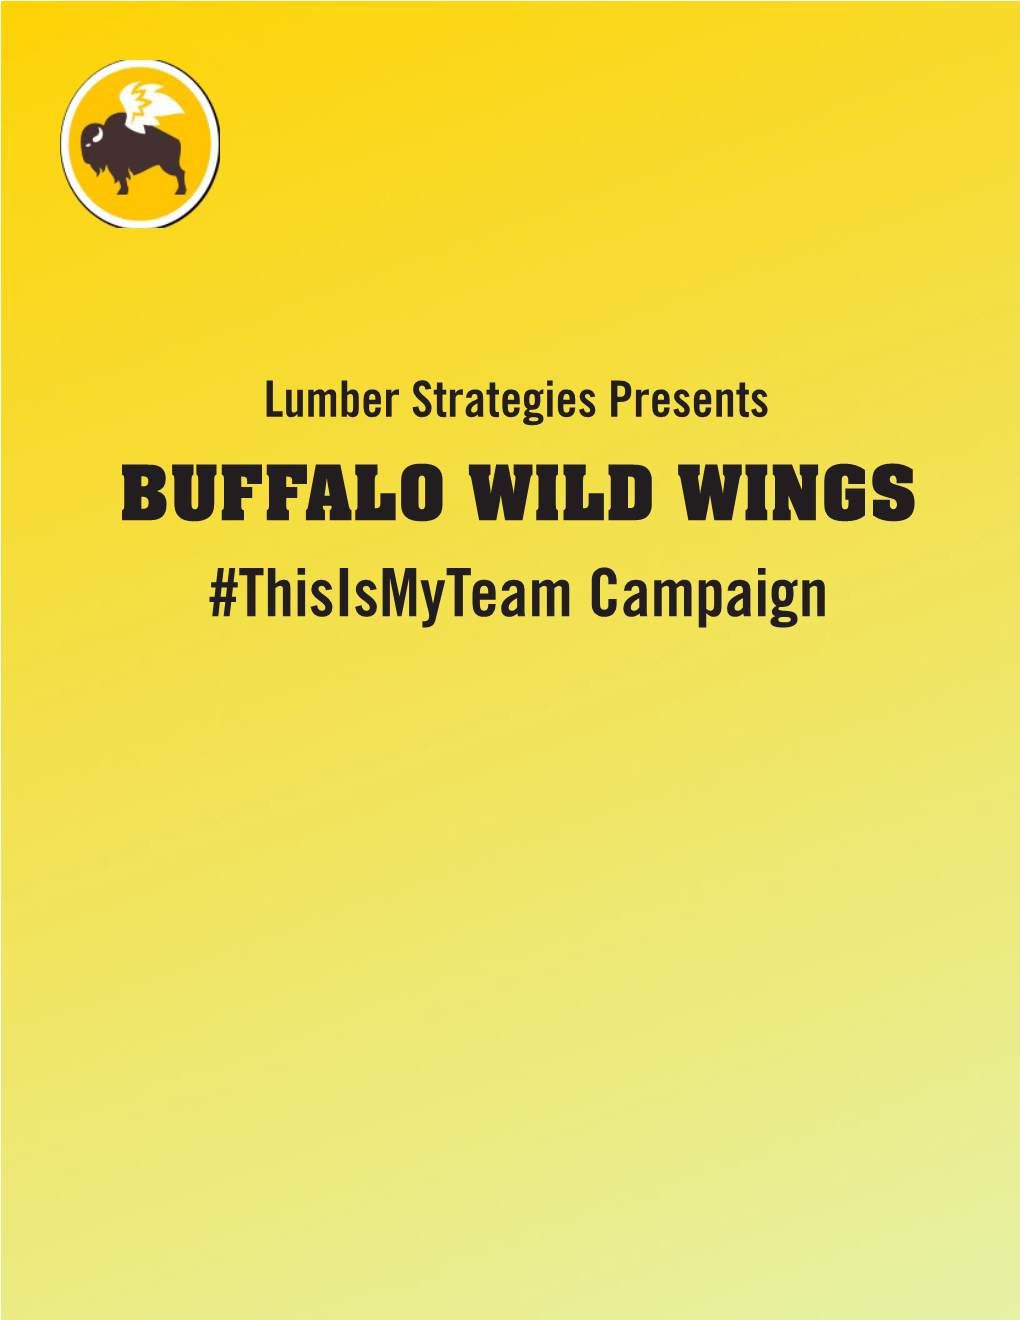 BUFFALO WILD WINGS #Thisismyteam Campaign This Is a Fctional Campaign Plan Created for a Class